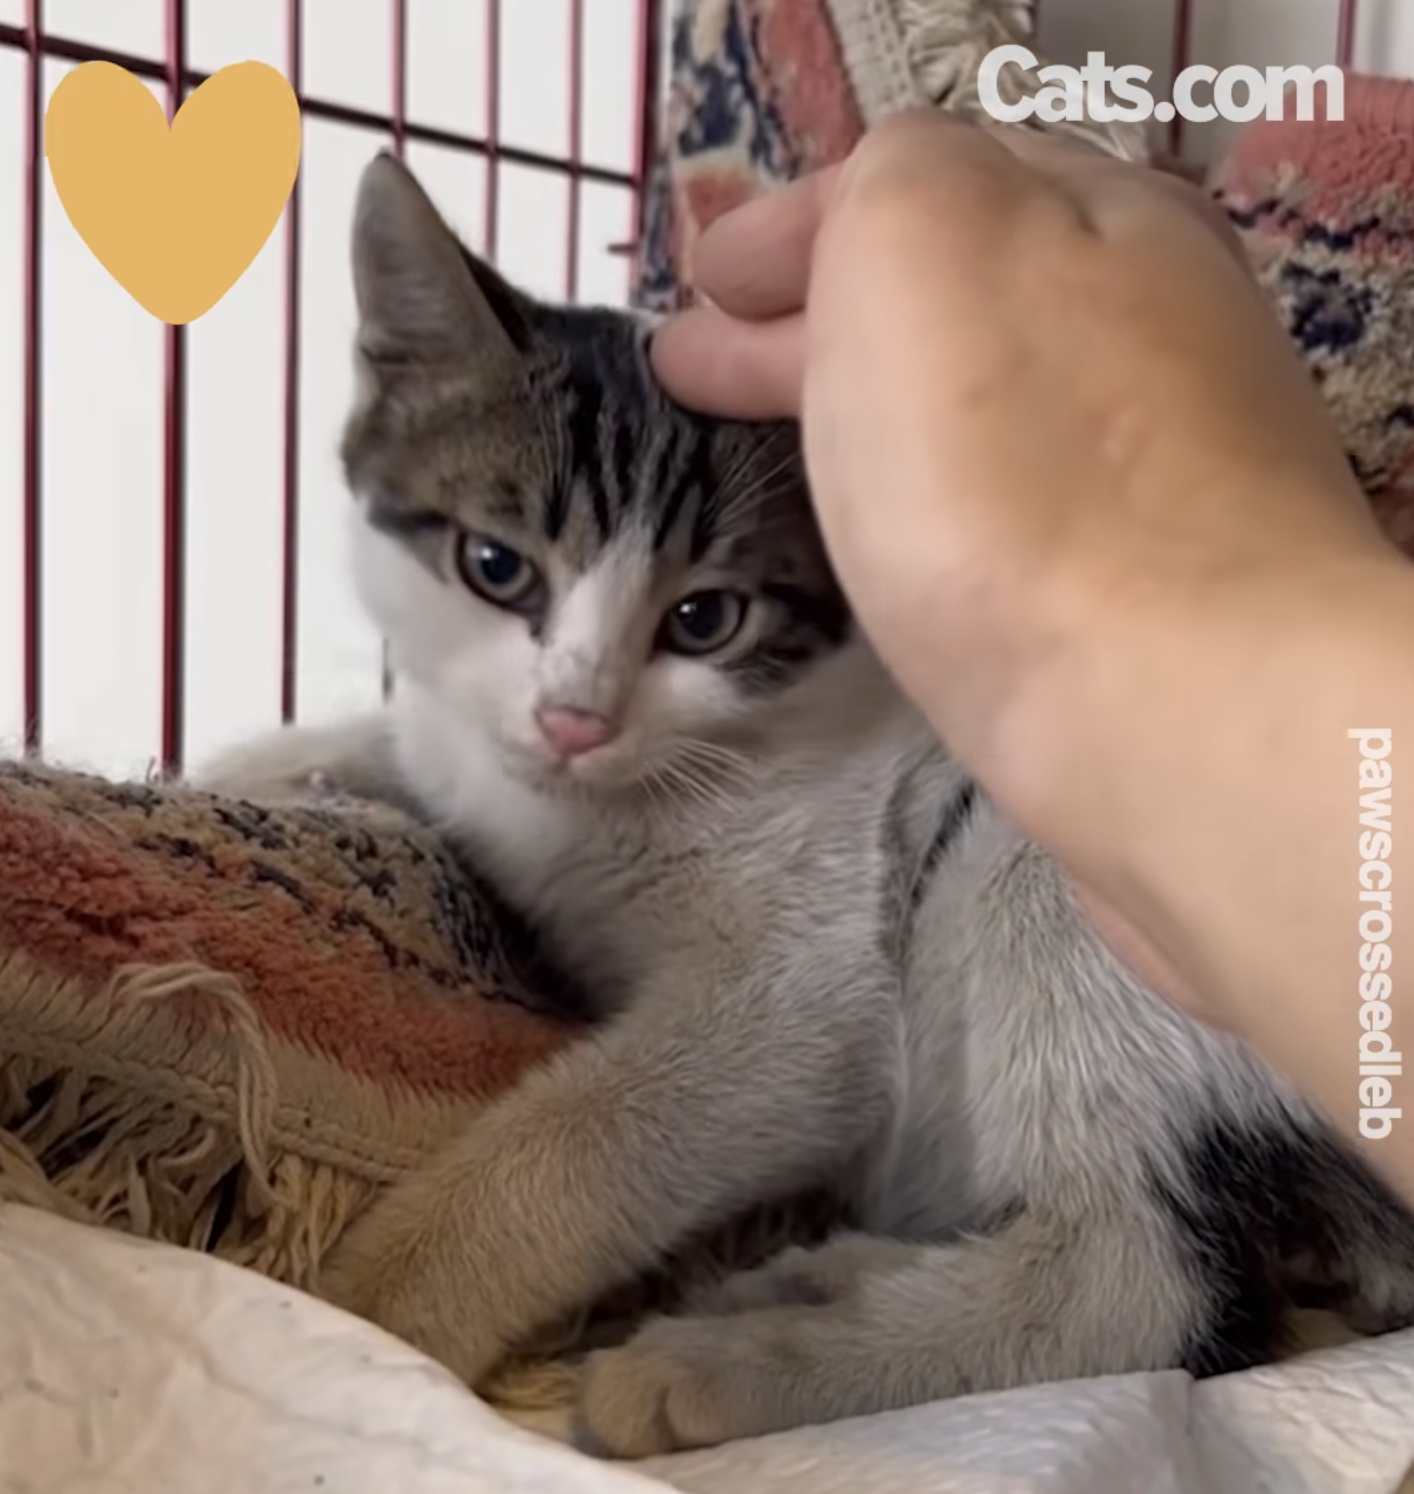 Milo now enjoys being pet by his rescuer